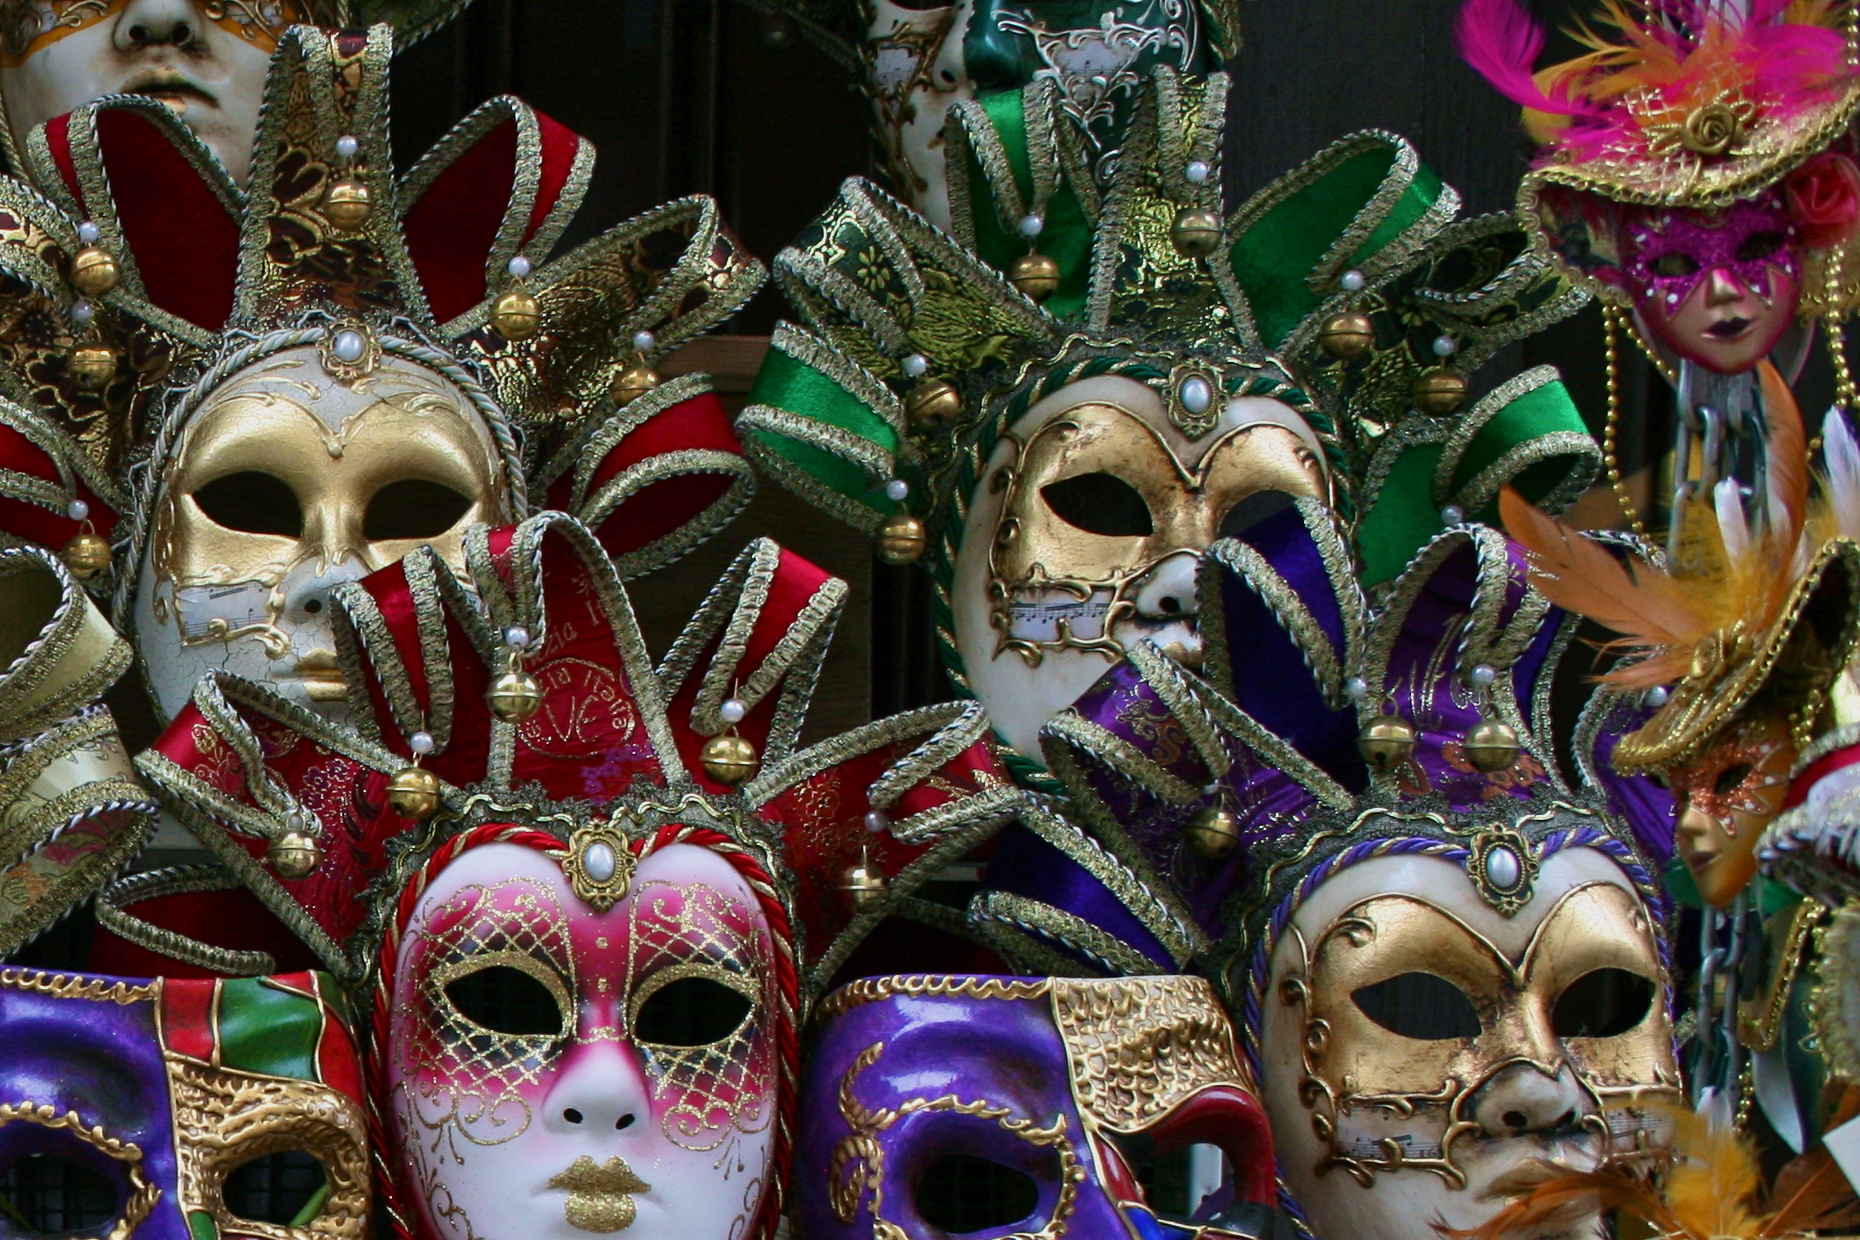 several masks are lined up together and ready to be pographed